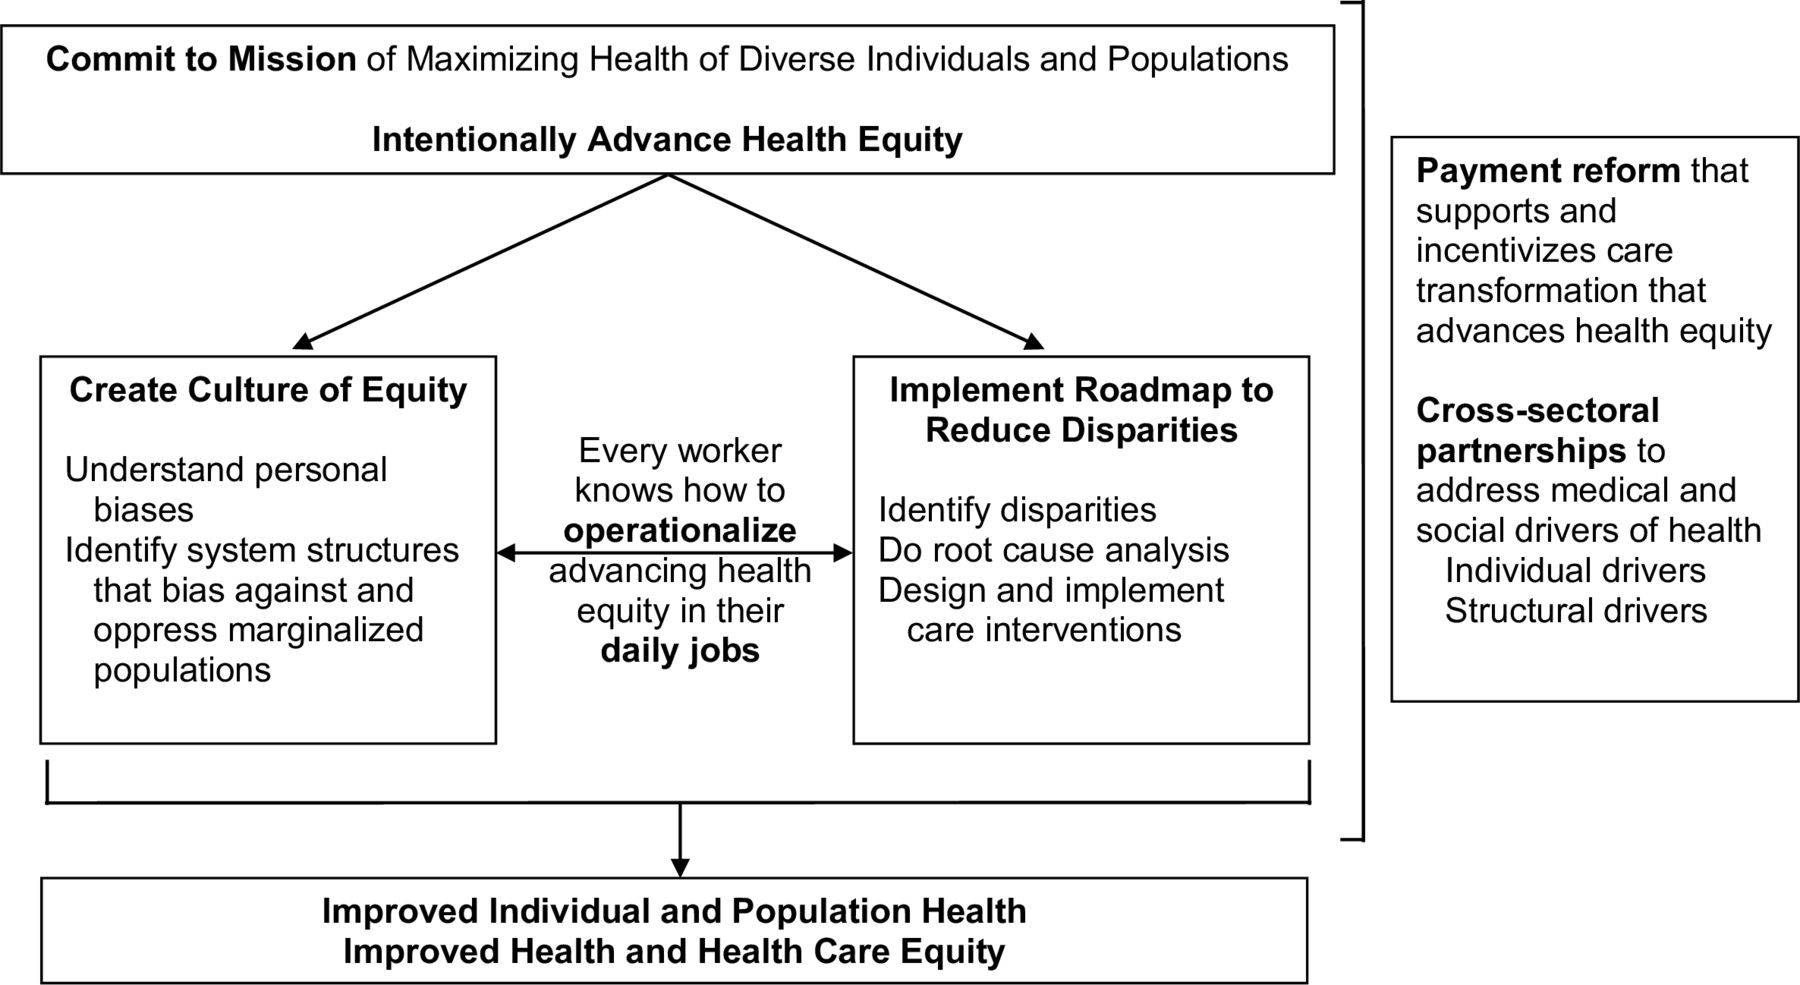 Dr. Marshall Chin’s Framework For Advancing Health Equity